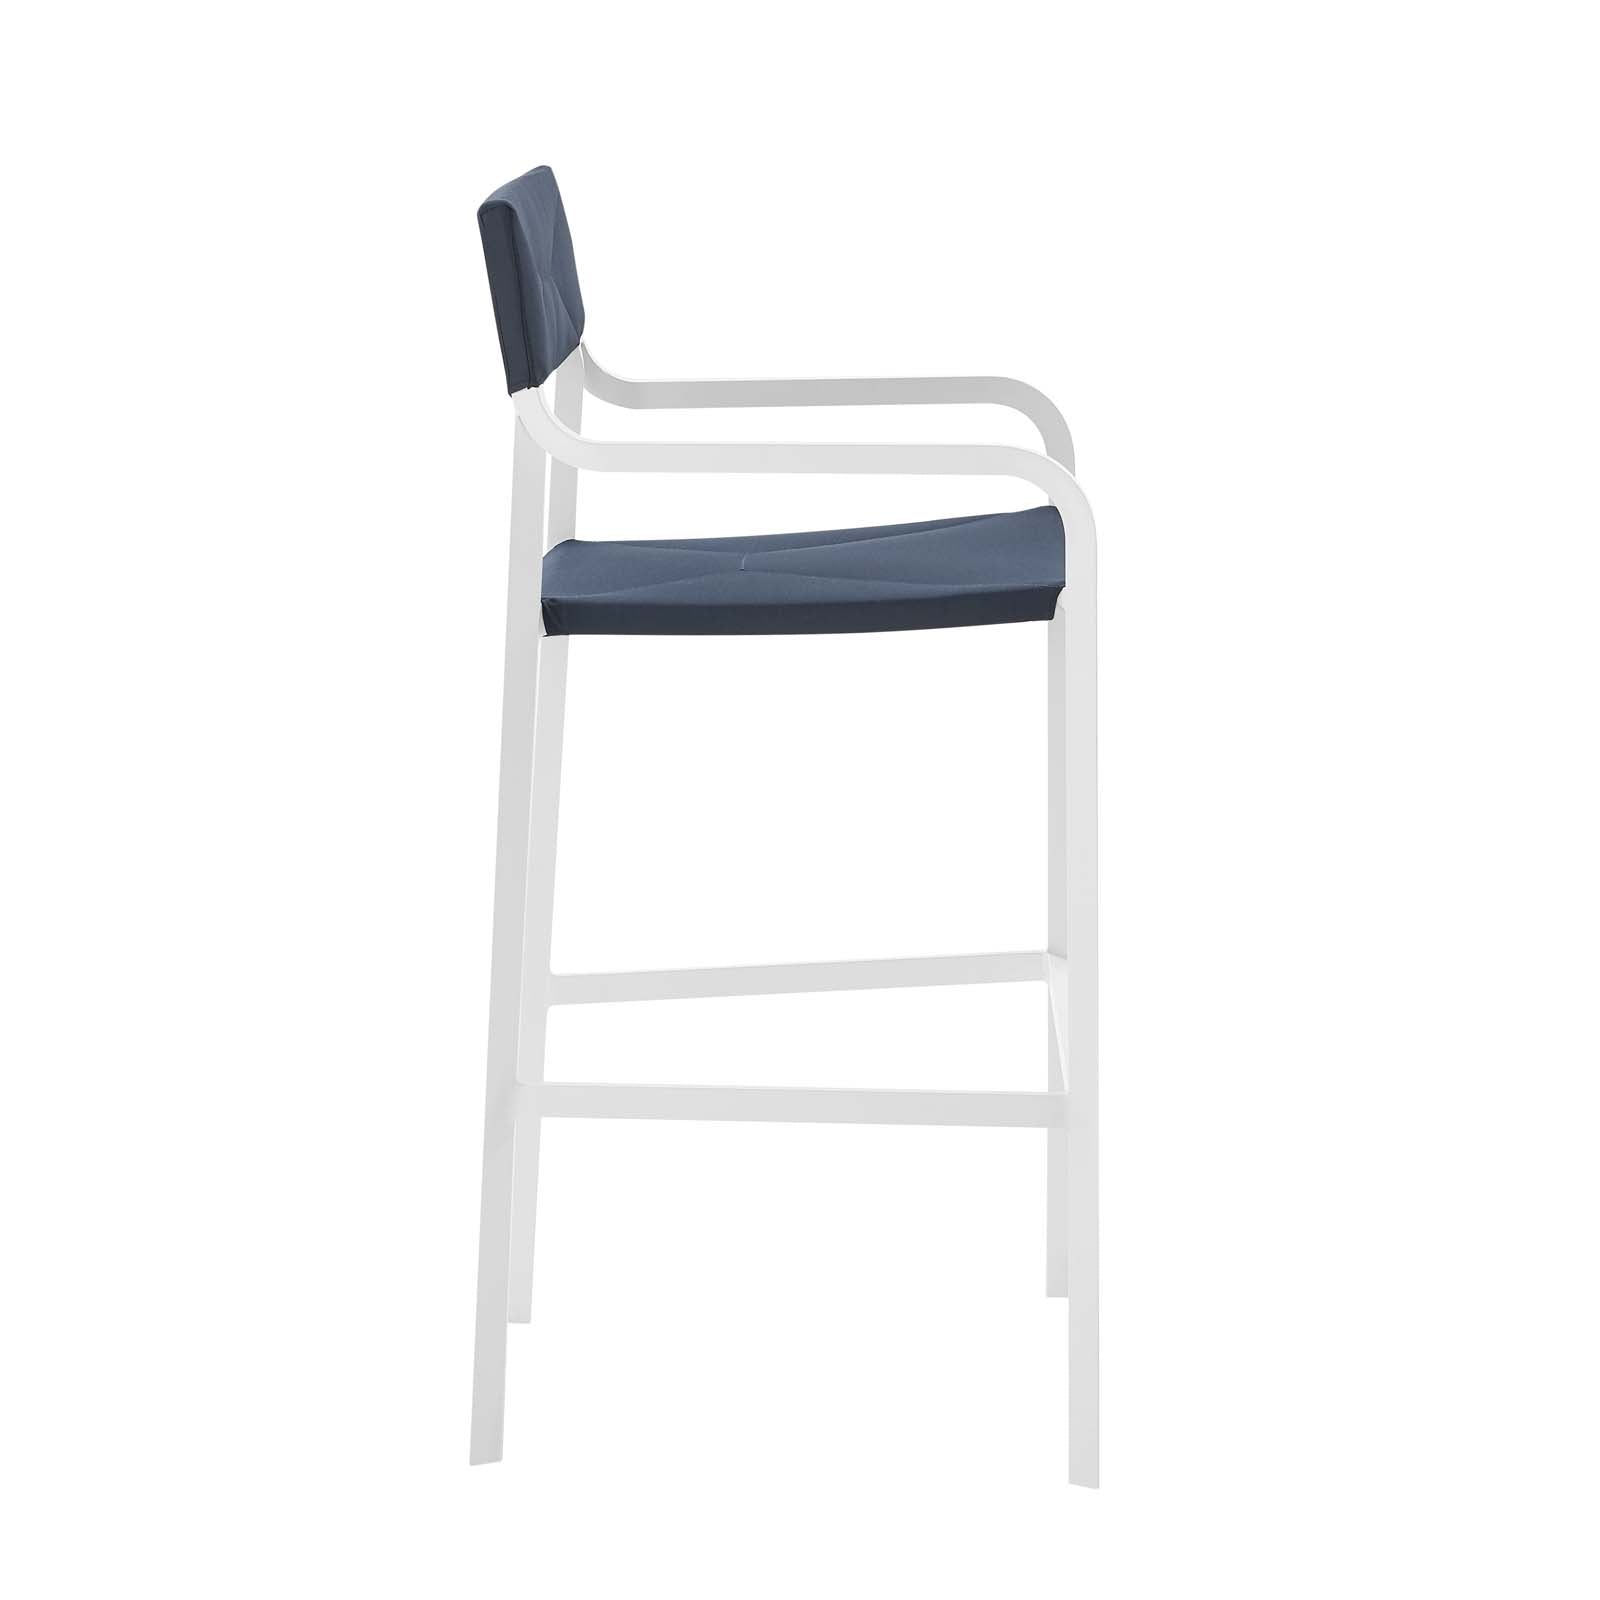 Raleigh Stackable Outdoor Patio Aluminum Bar Stool - East Shore Modern Home Furnishings